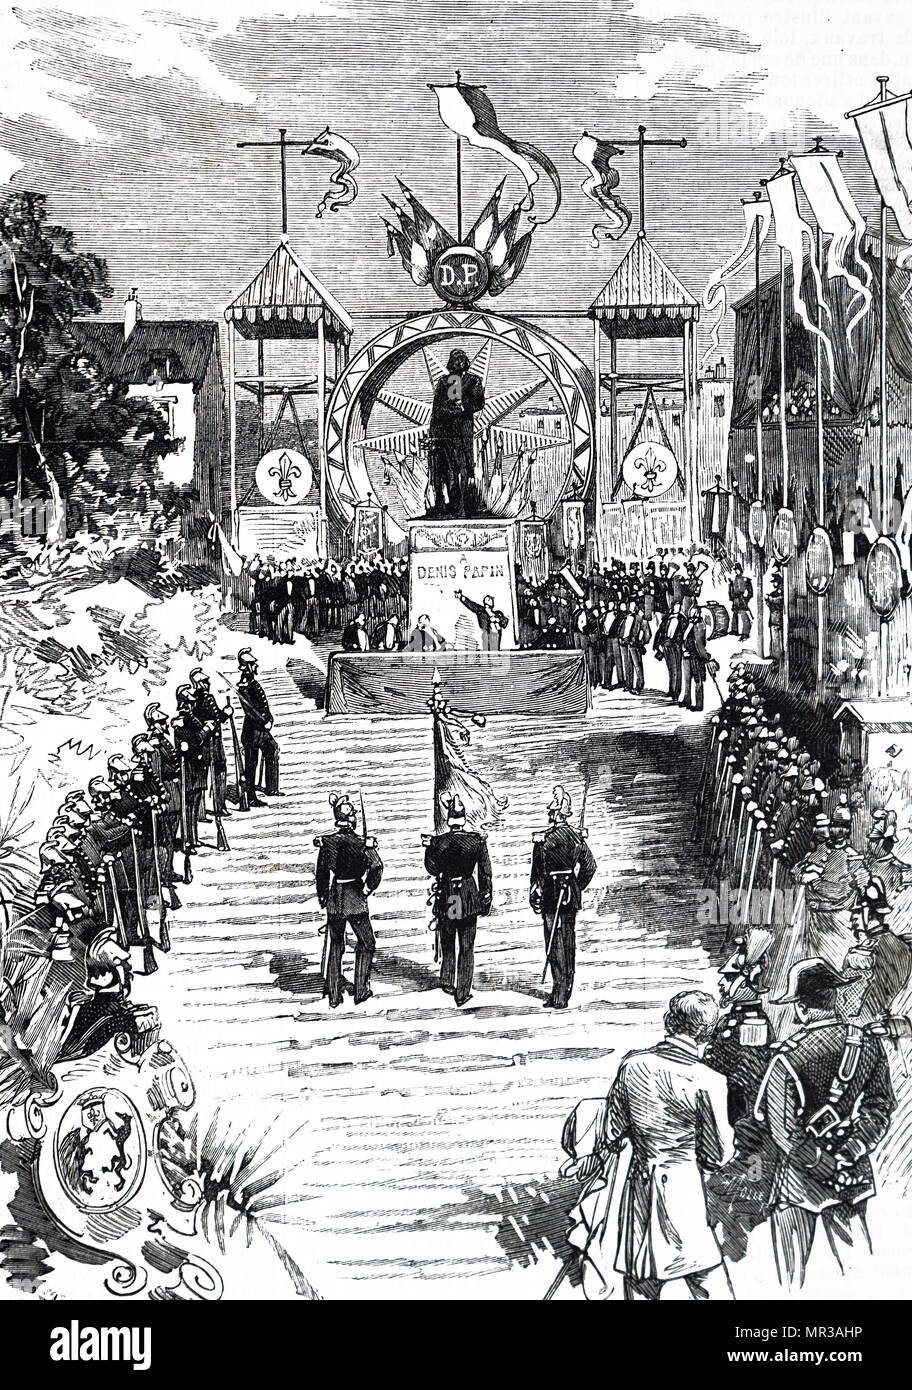 Engraving depicting the unveiling of the statue of Denis Papin at Blois, France. Denis Papin (1647-1713) a French physicist, mathematician and inventor. Dated 19th century Stock Photo